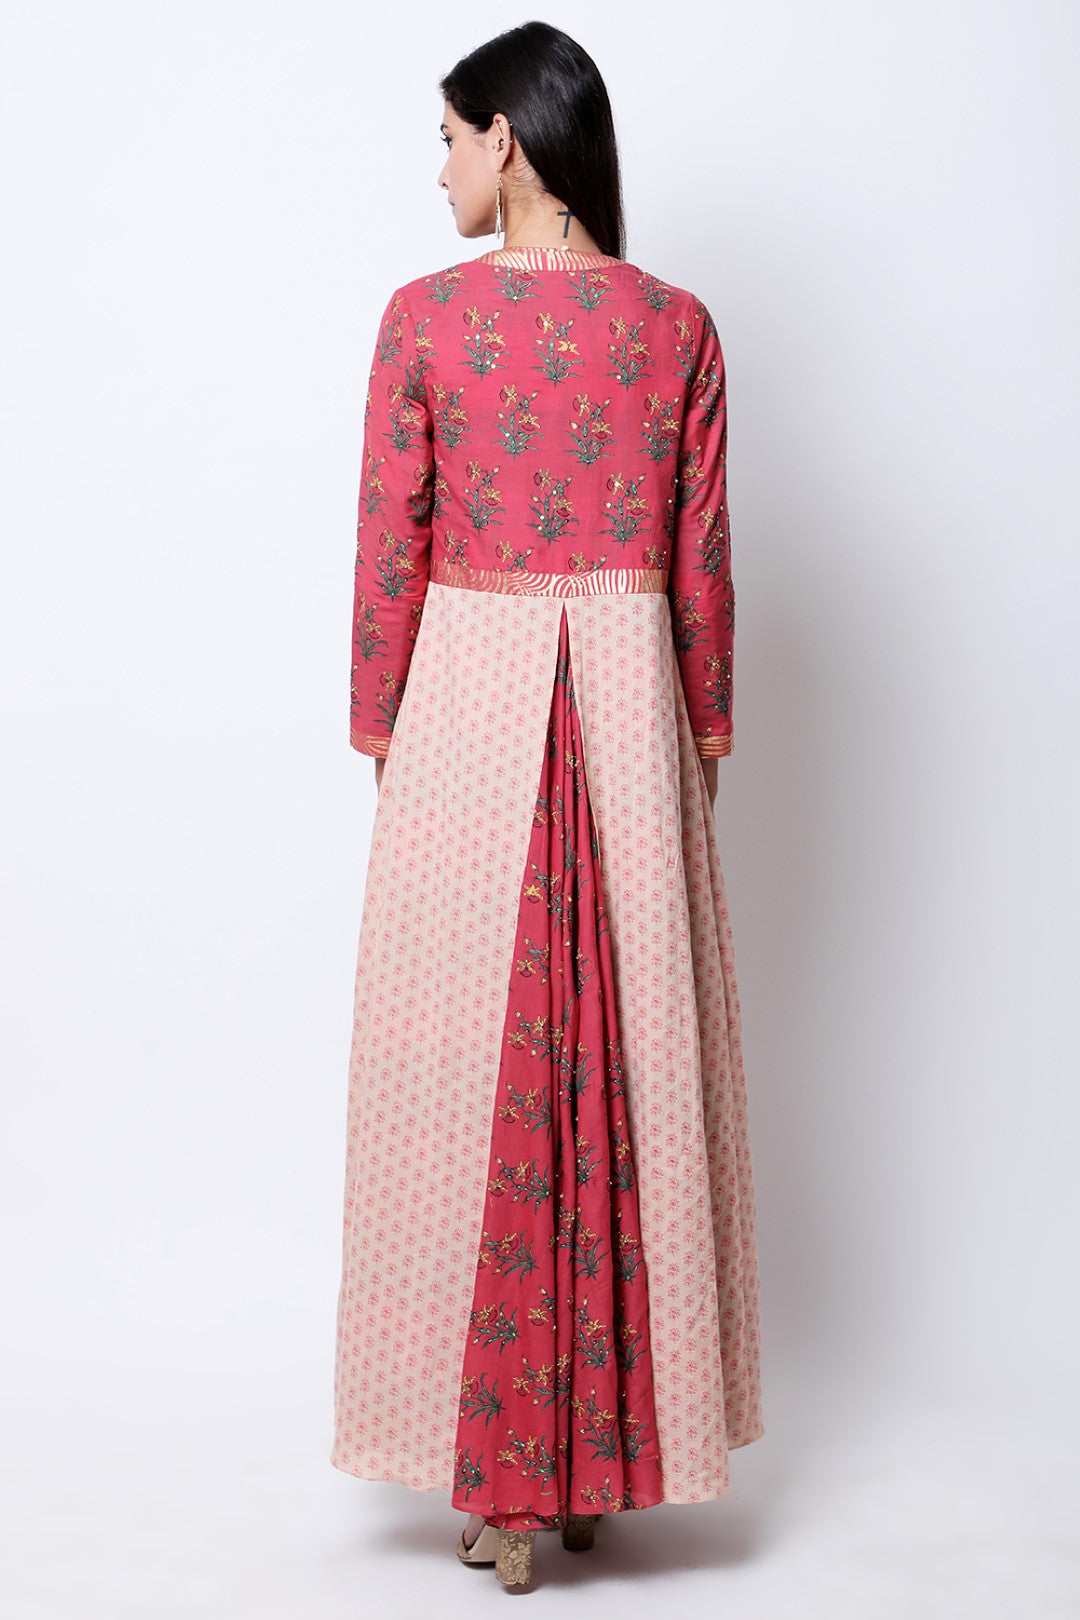 Burgundy and Light Tabacco hand-printed long jacket , paired with flare halter neck top and dhoti.